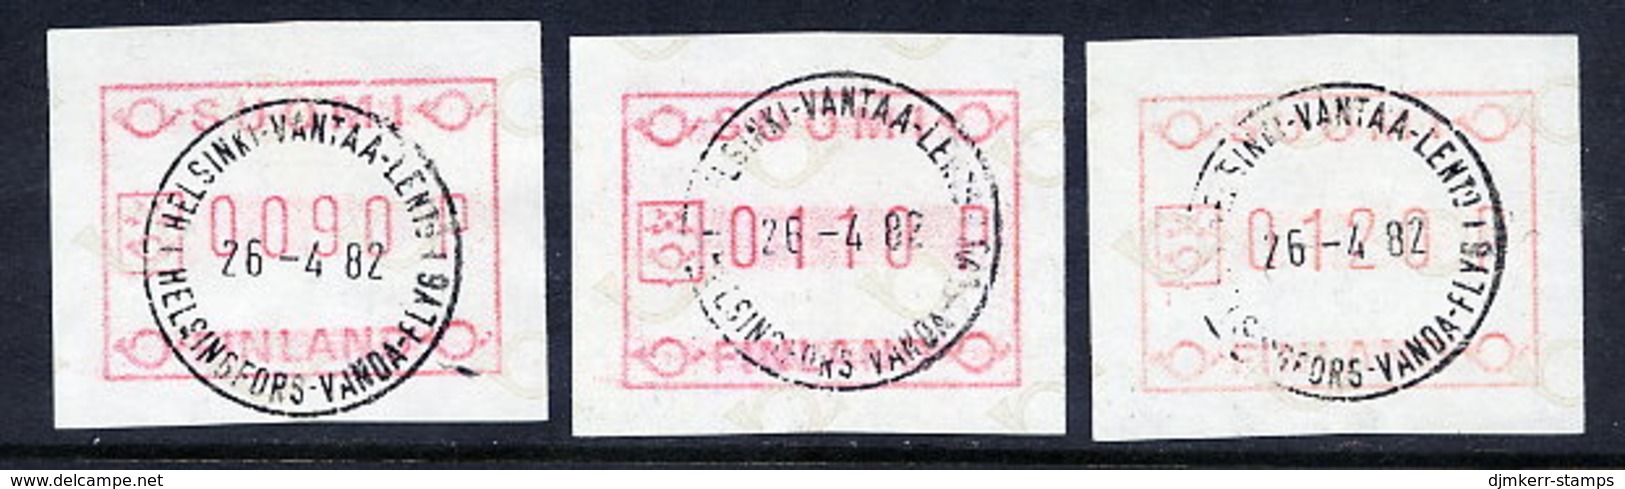 FINLAND 1982 Definitive , 3 Different Values Used .Michel 1 - Automaatzegels [ATM]